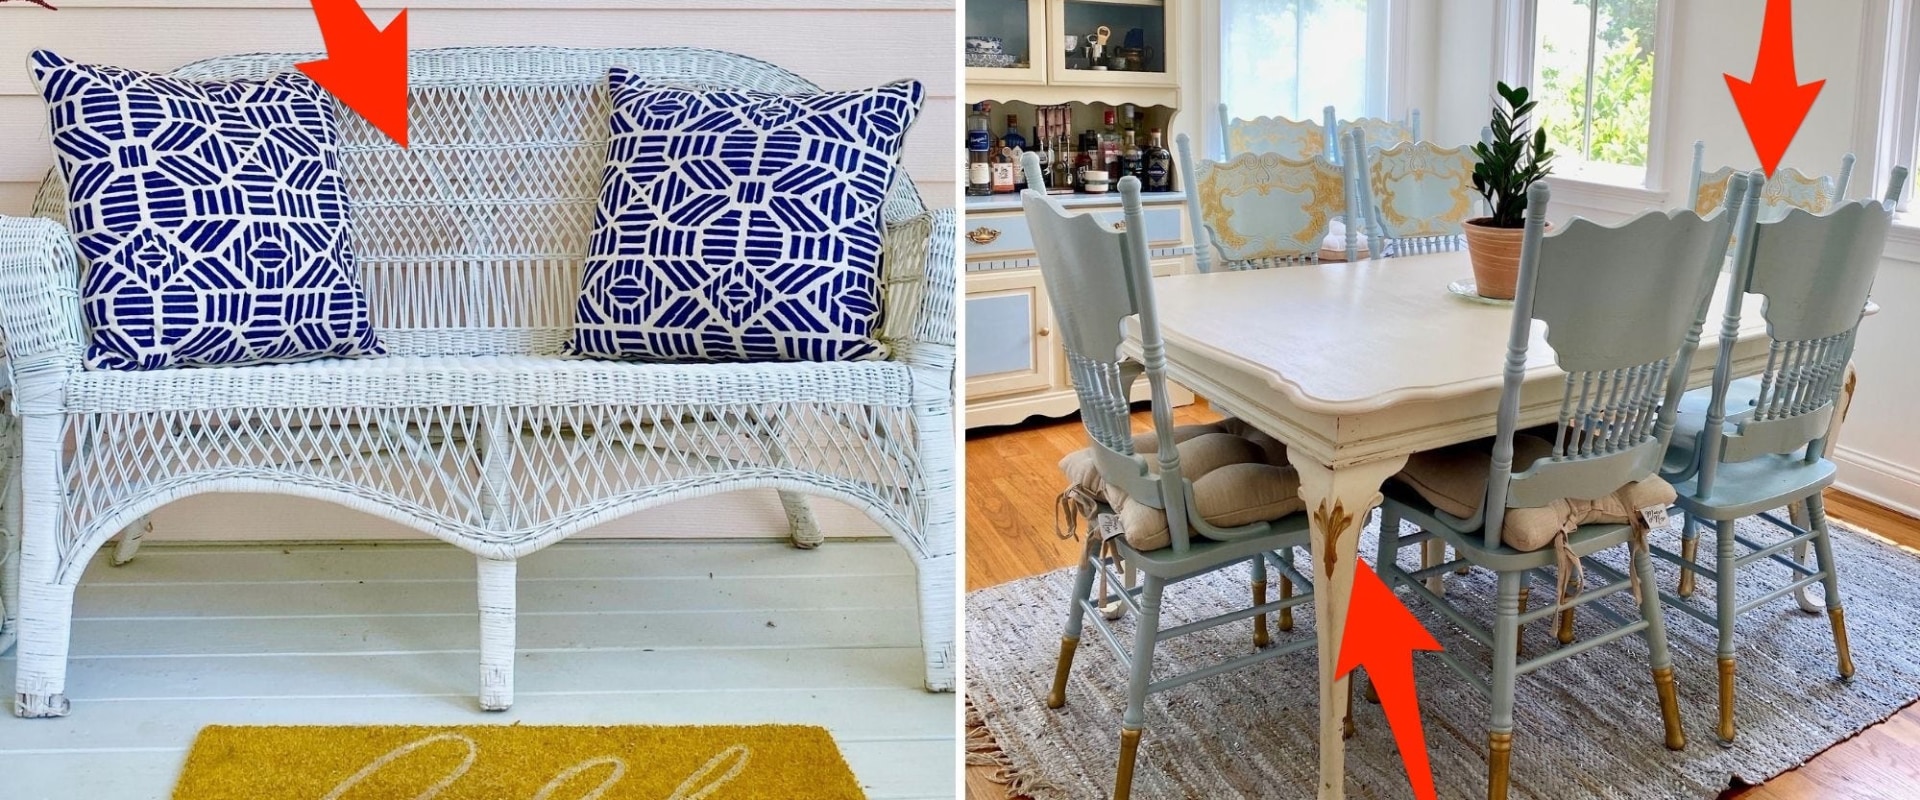 Upcycling Furniture: Revamp Your Home on a Budget